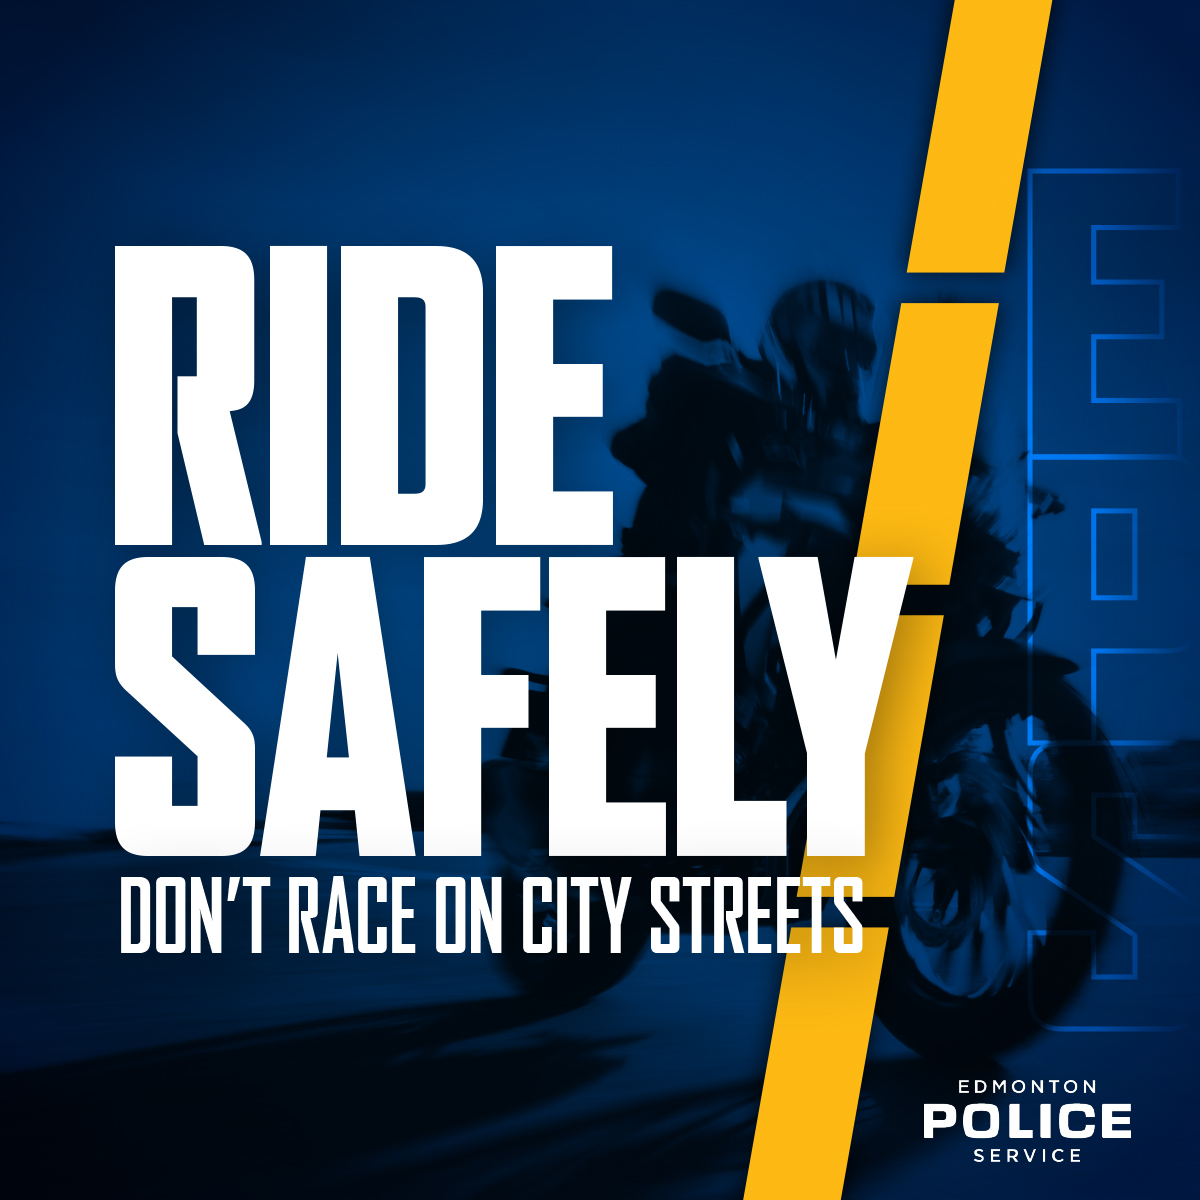 Don't race on City streets